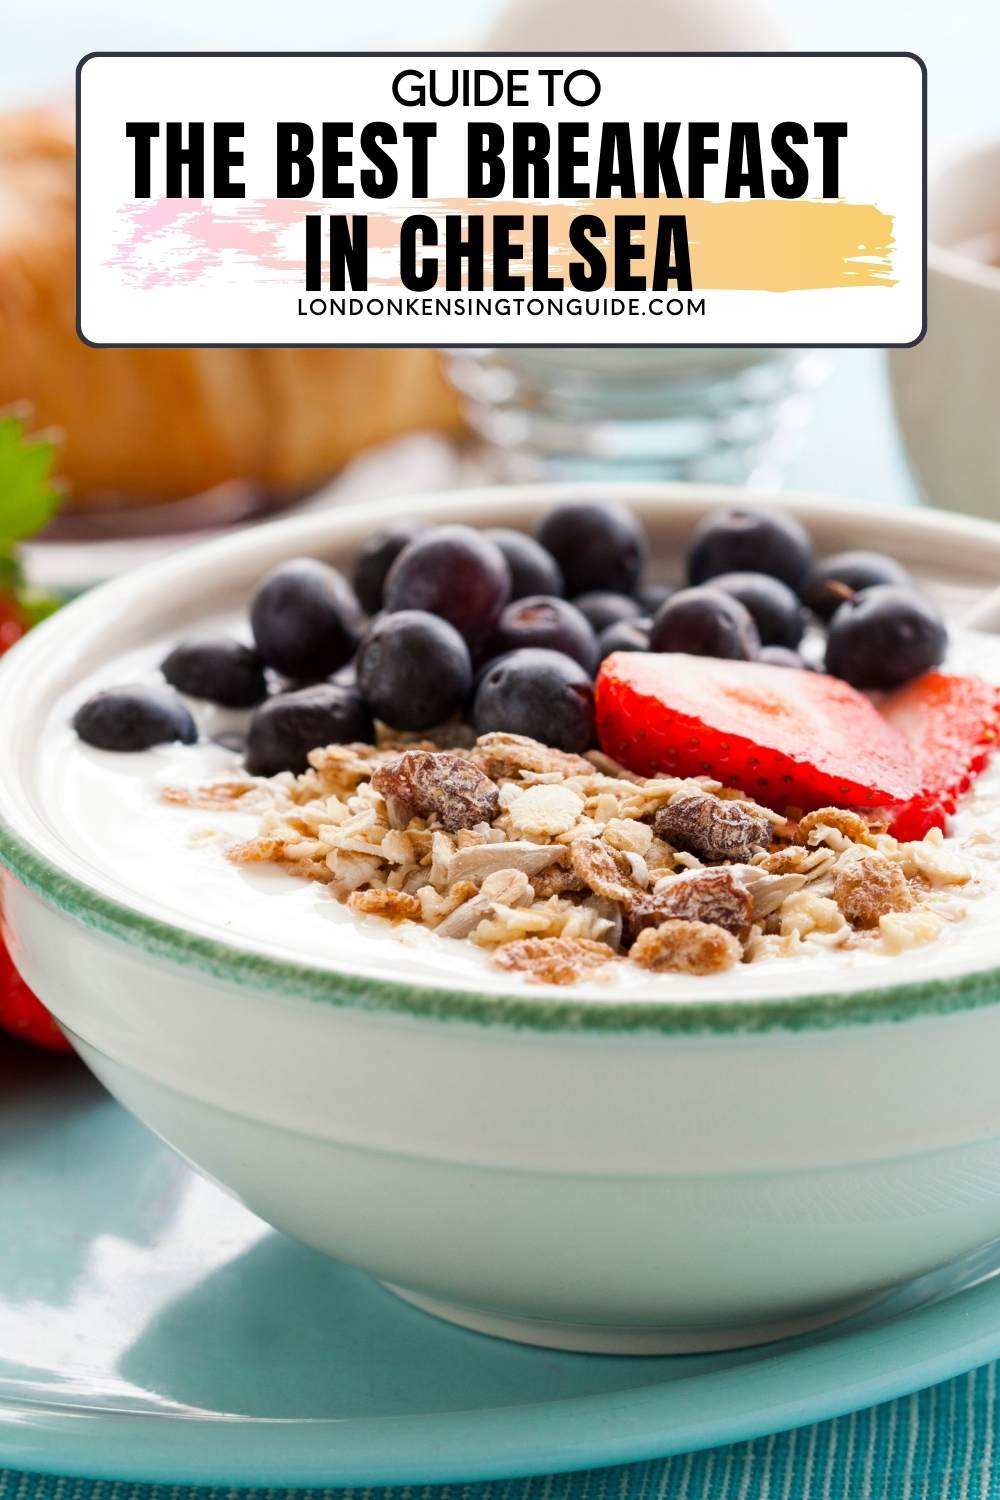 Guide to the best breakfast in Chelsea. Whether you are in the mood for a late breakfast, full English, European or Arabic inspired breakfast, Chelsea has it all. Here are the best spots for a Chelsea Breakfast. breakfast on kings road | breakfast in Sloane square | breakfast in Chelsea london | best breakfast in Chelsea london | best breakfast Chelsea | breakfast in Chelsea | breakfast restaurants in Chelsea | 